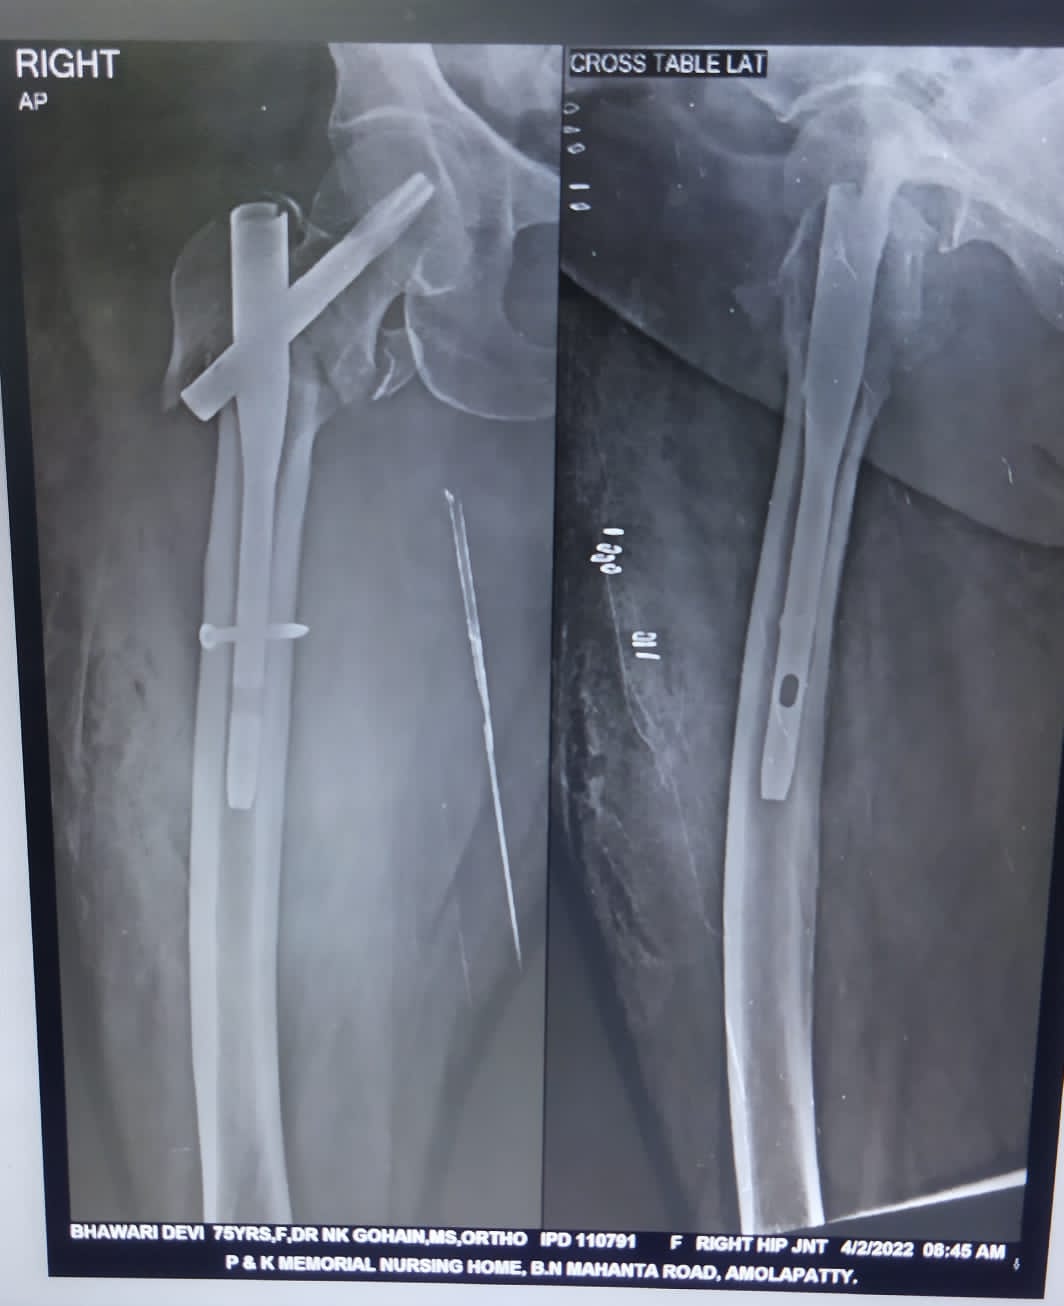 Intertrochanteric femur comminuted fracture treated by Closed Reduction & Internal Fixation with PFNA2 Titanium Interlocking Nail